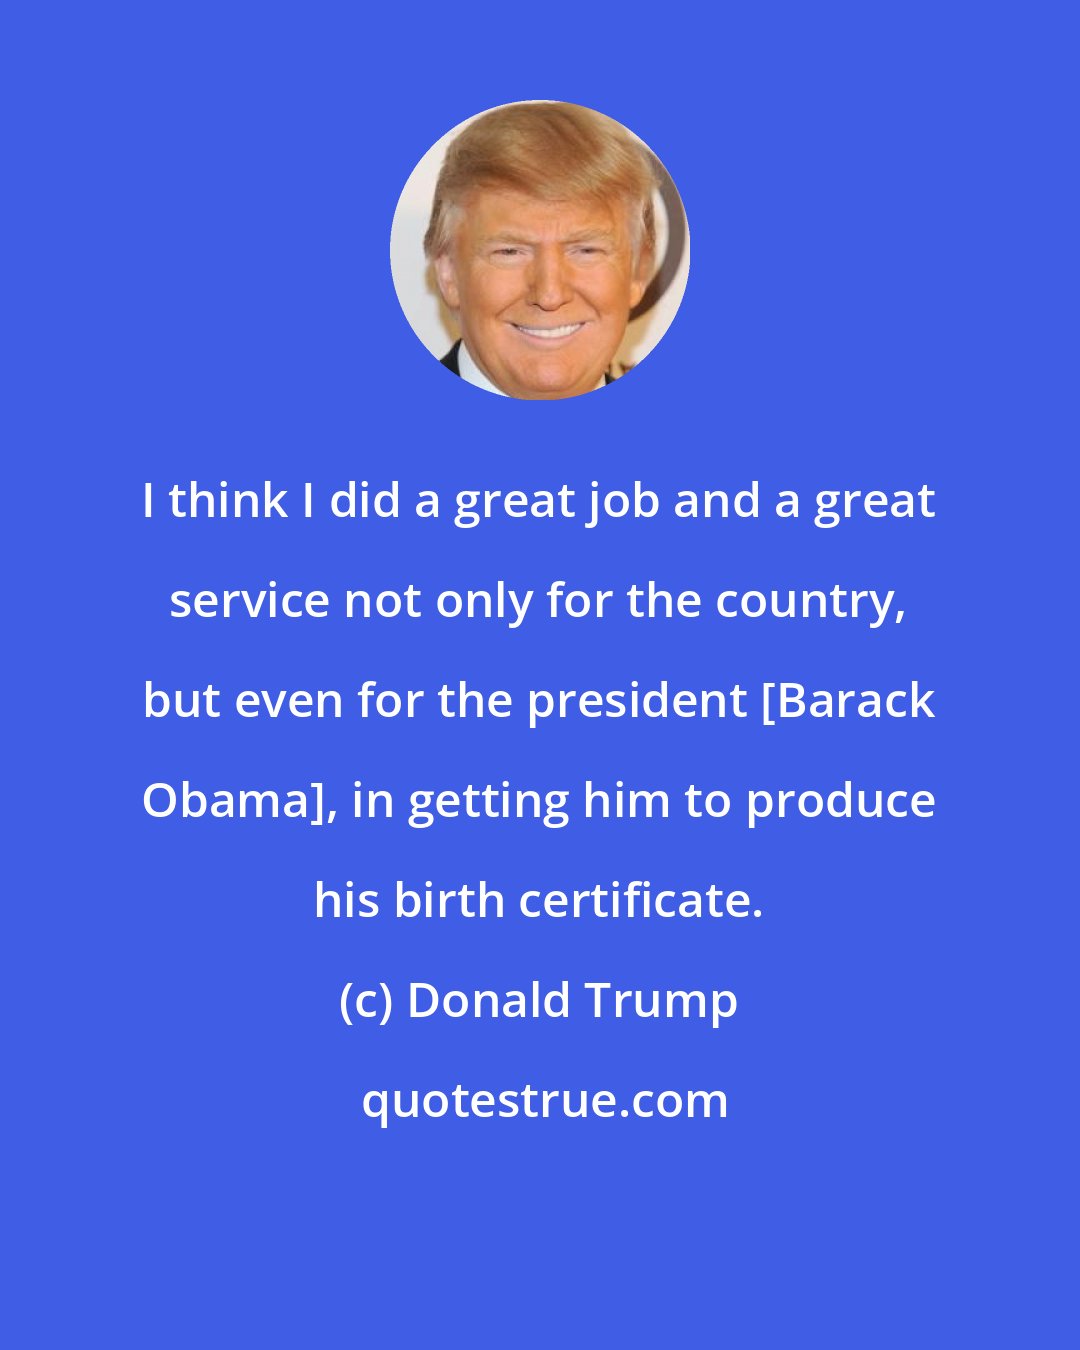 Donald Trump: I think I did a great job and a great service not only for the country, but even for the president [Barack Obama], in getting him to produce his birth certificate.